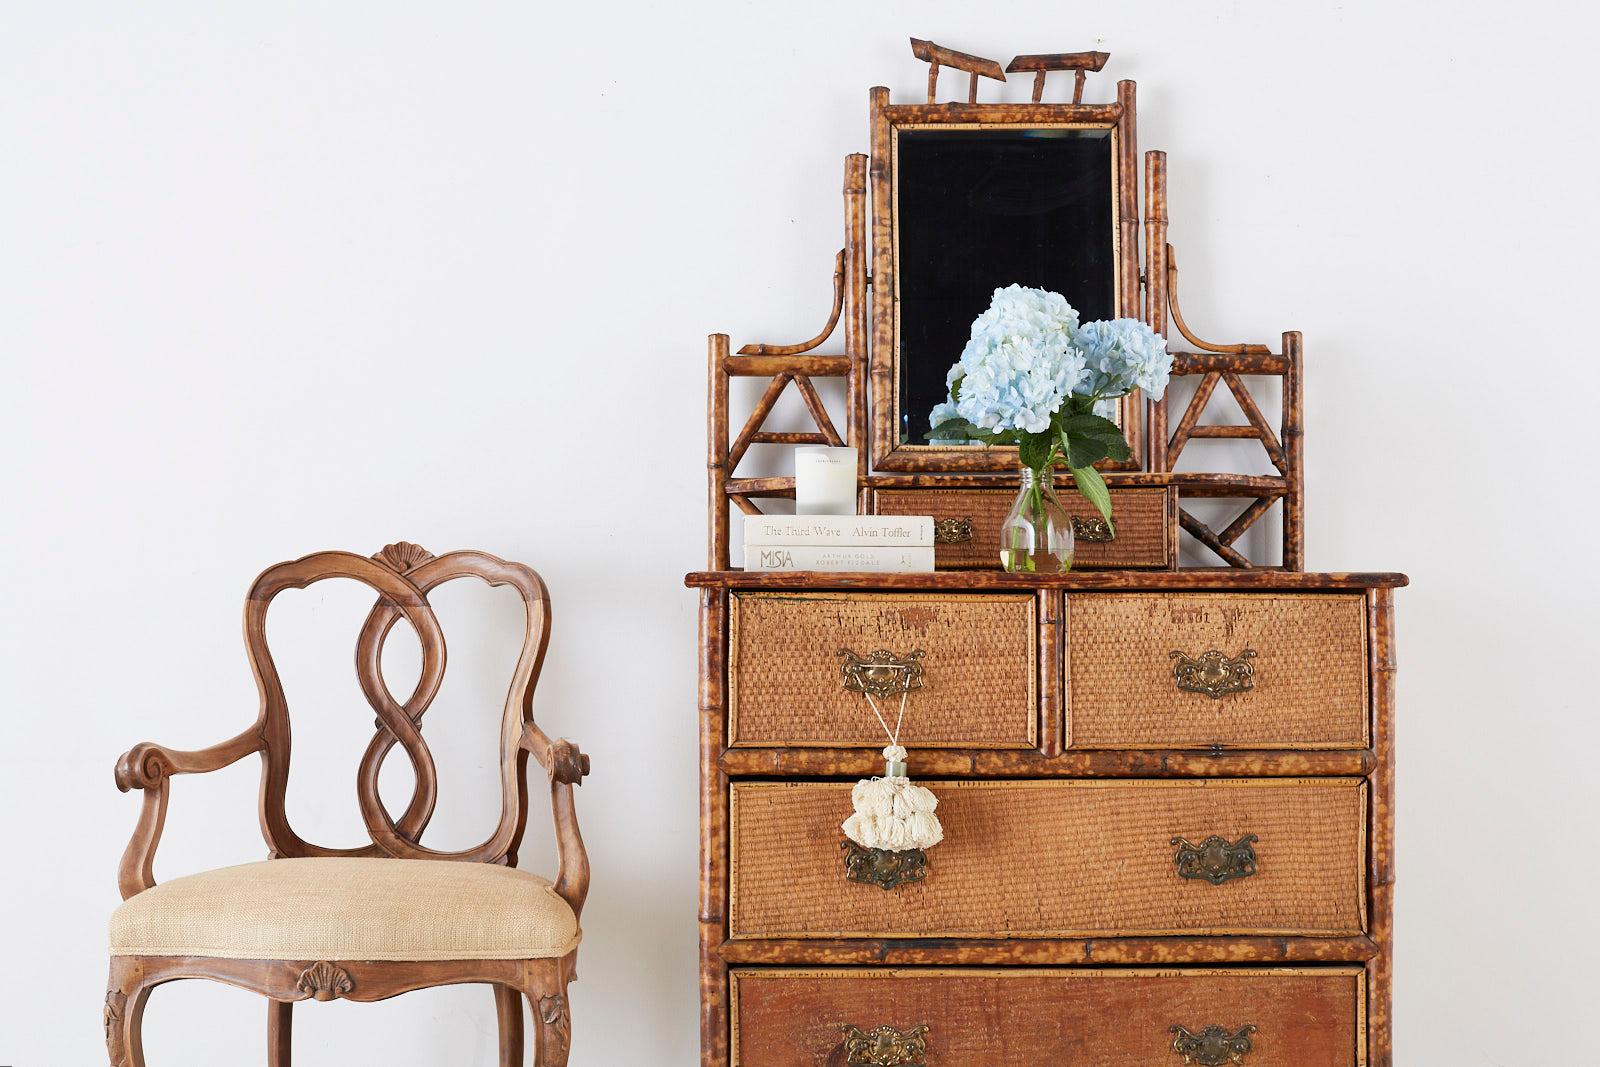 Charming English chinoiserie dressing table featuring a tilt beveled mirror and shelf. Constructed from beautiful tortoiseshell bamboo poles and finished with raffia grasscloth covered surfaces. The chest is fronted by five large storage drawers